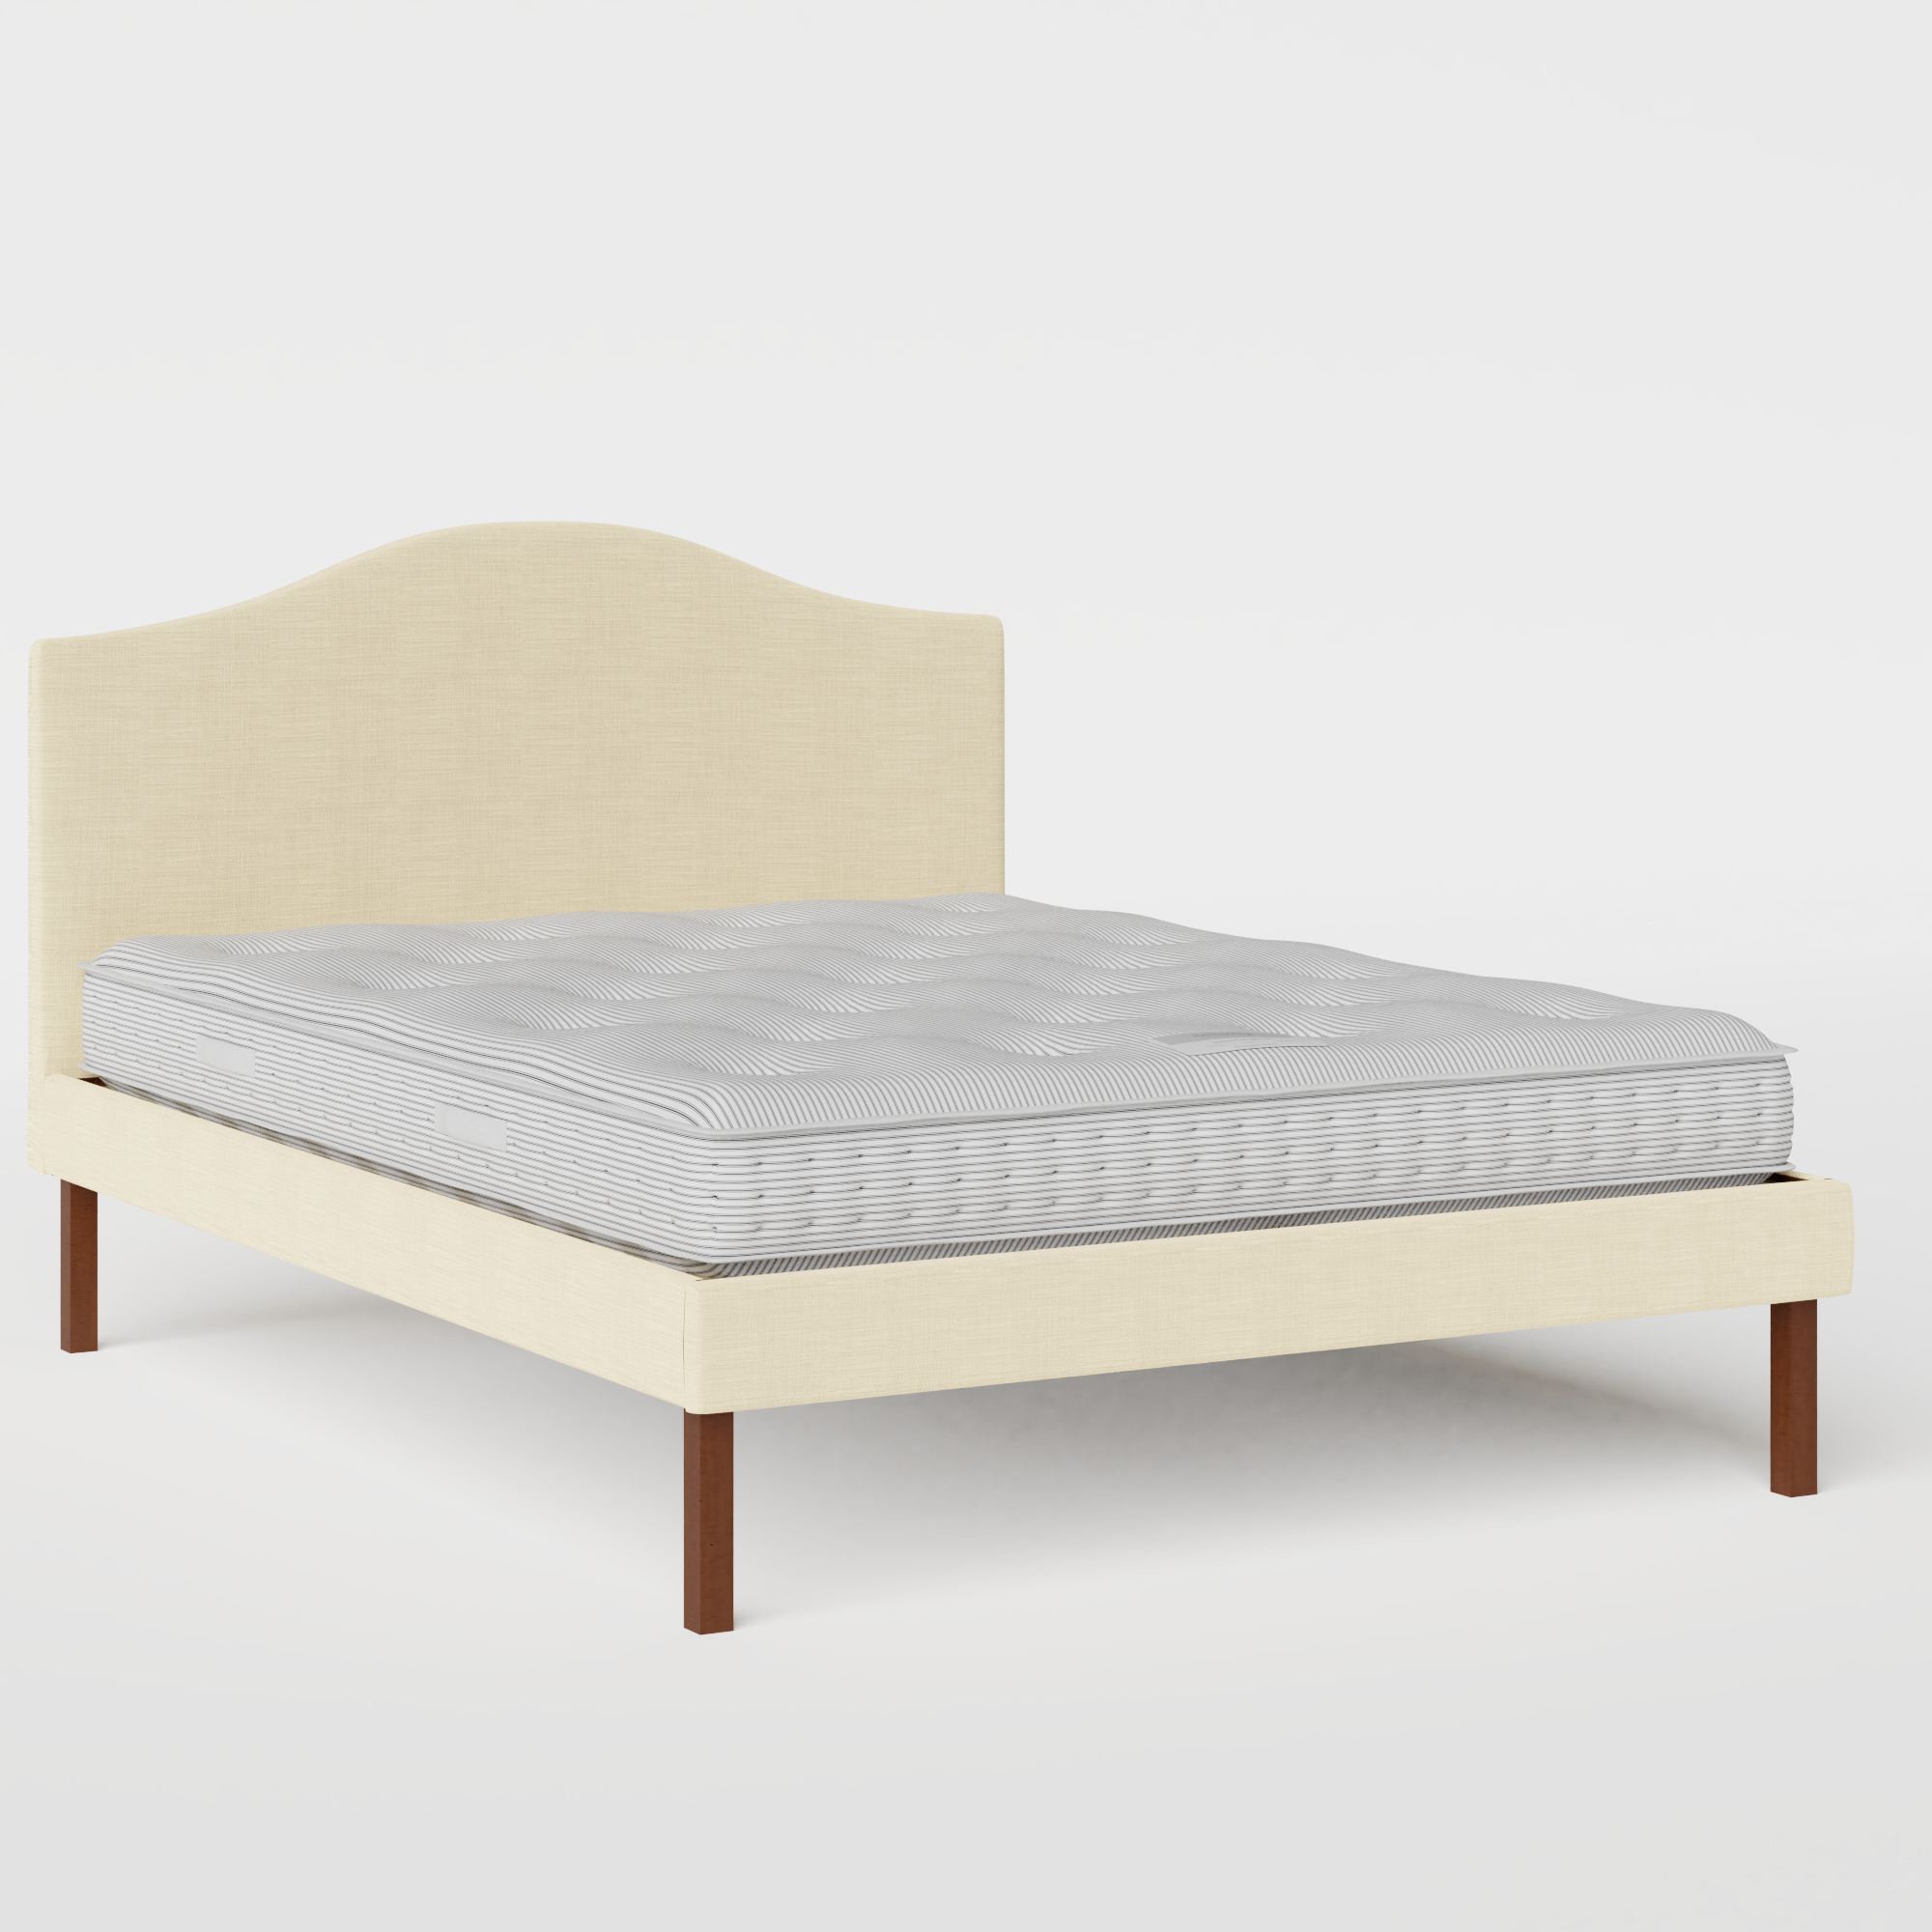 Yoshida Upholstered stoffen bed in natural